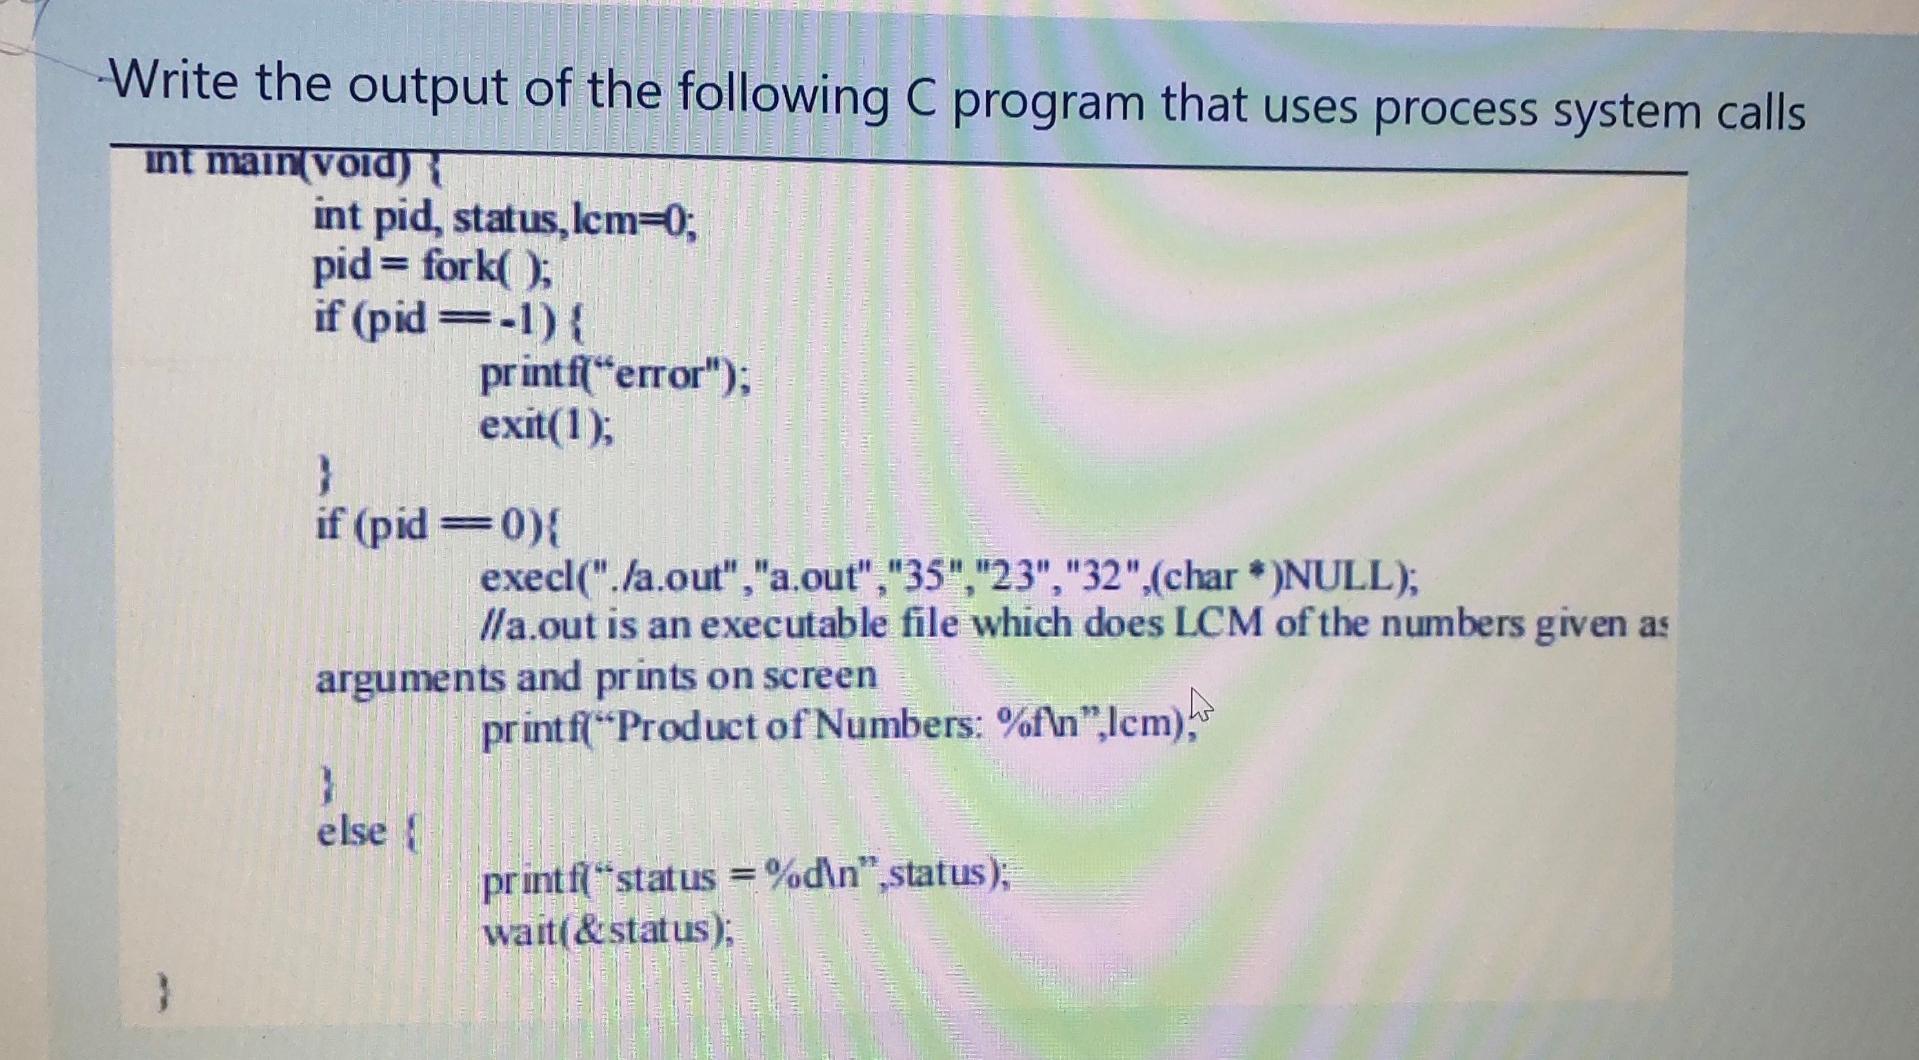 Write the output of the following C program that uses process system calls int main(void) { } int pid,